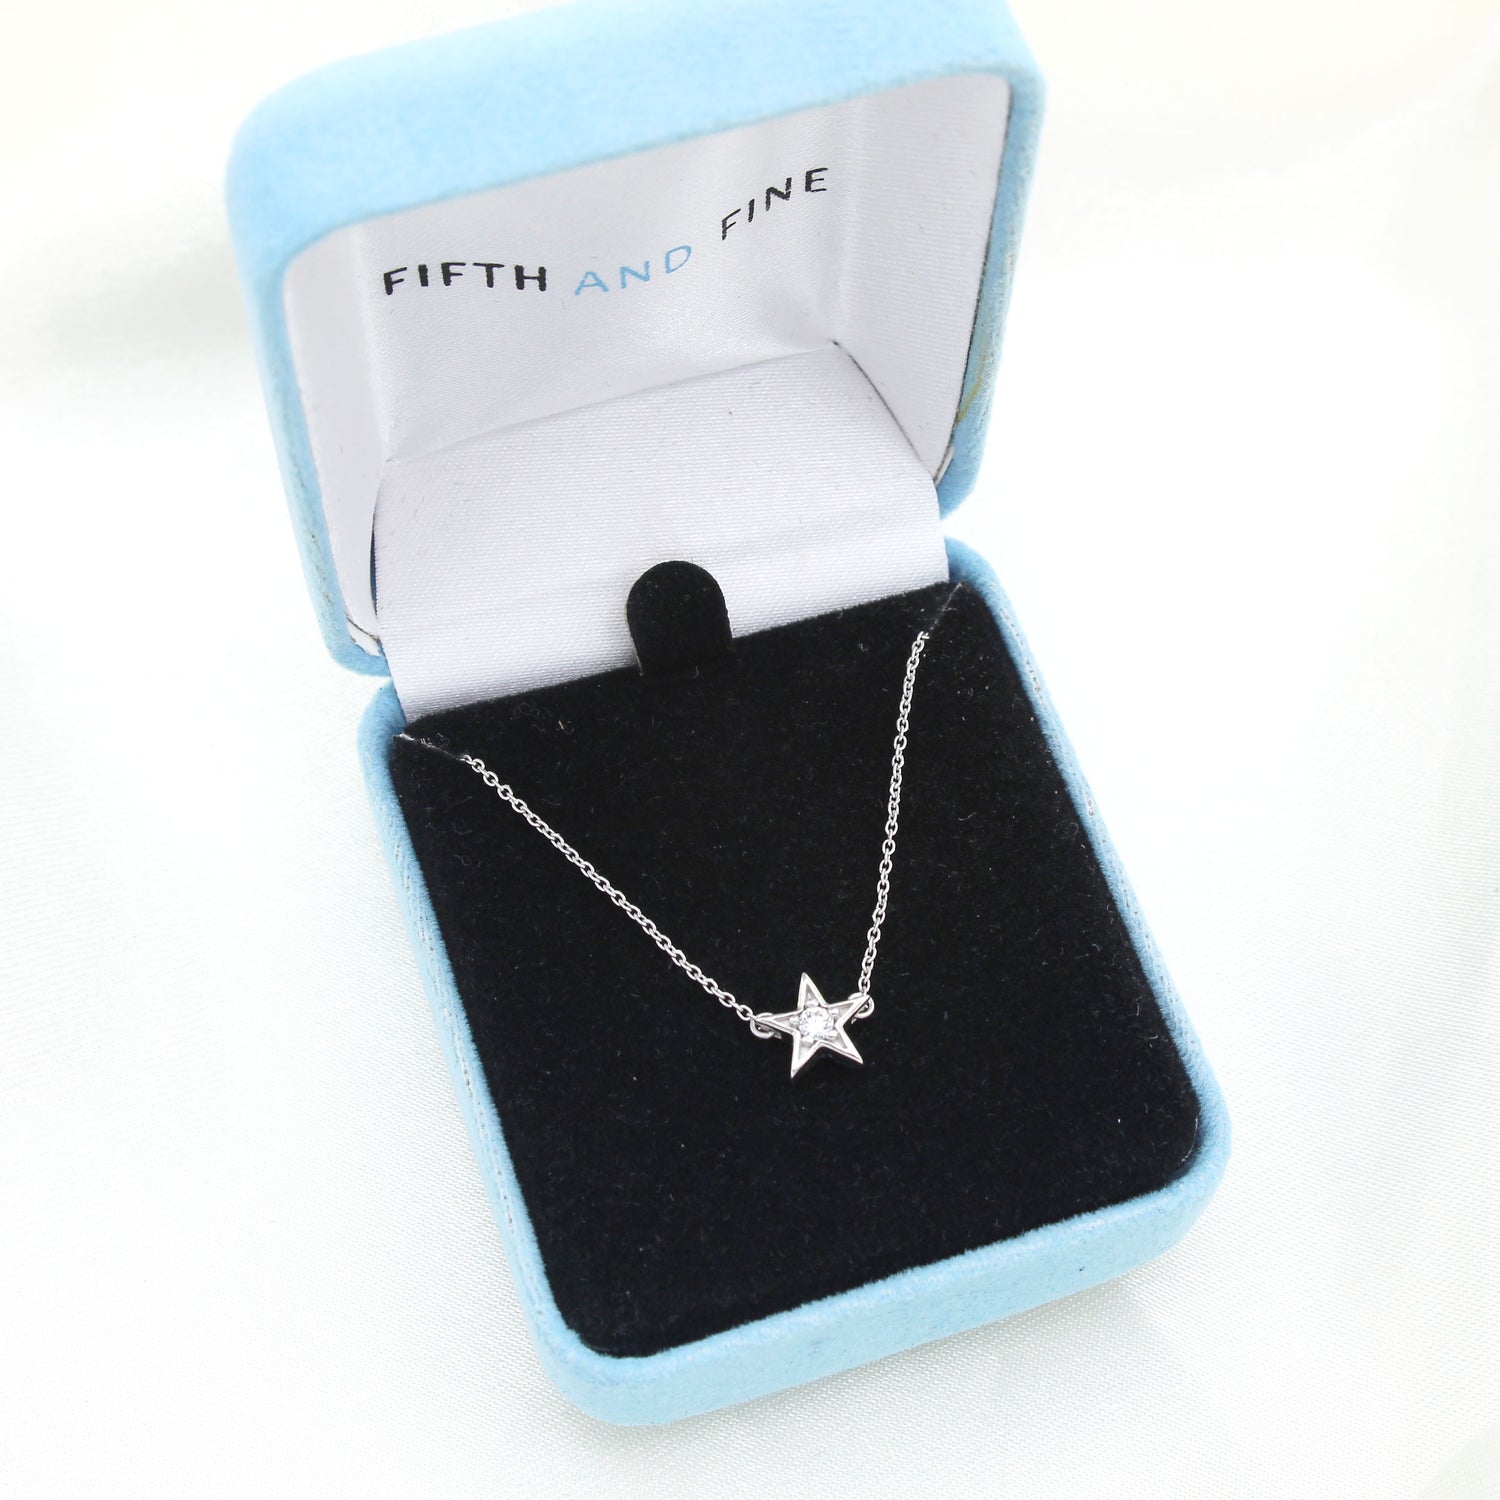 Star 1/20 Cttw Natural Diamond Pendant Necklace set in 925 Sterling Silver jewelry gift layring